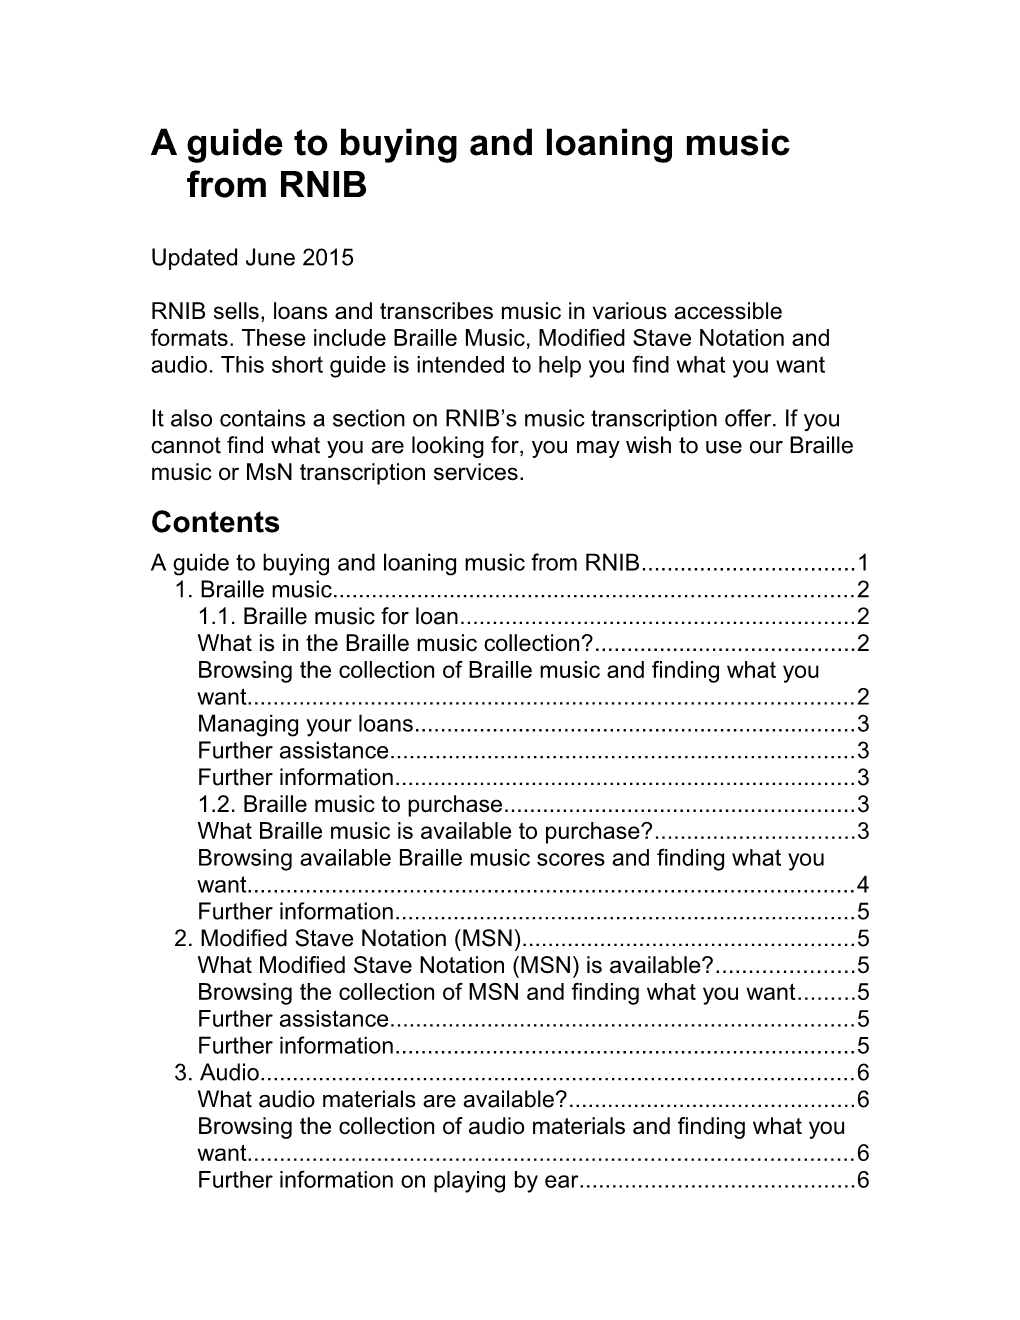 A Guide to Buying and Loaning Music from RNIB